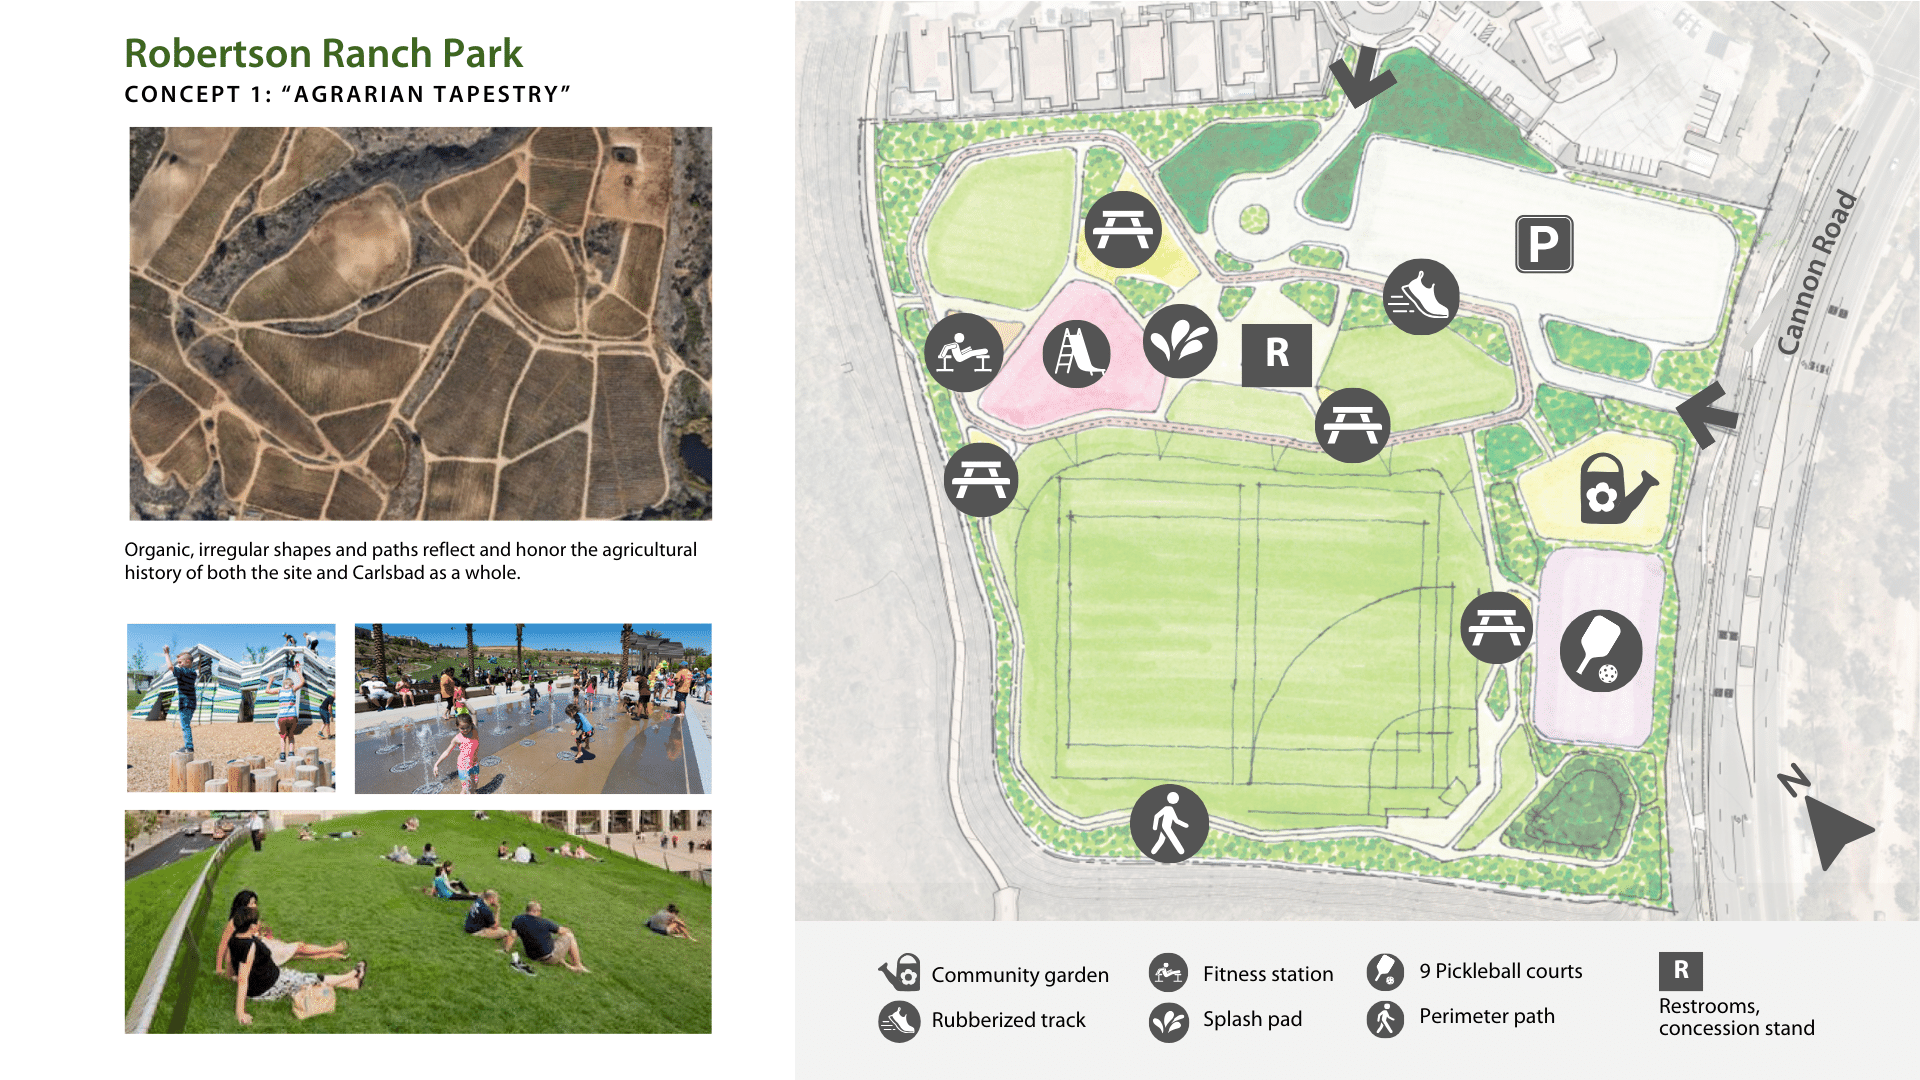 An at a glance view shows the primary features and amenities of the Agrarian Tapestry park design concept and some inspiration imagery.